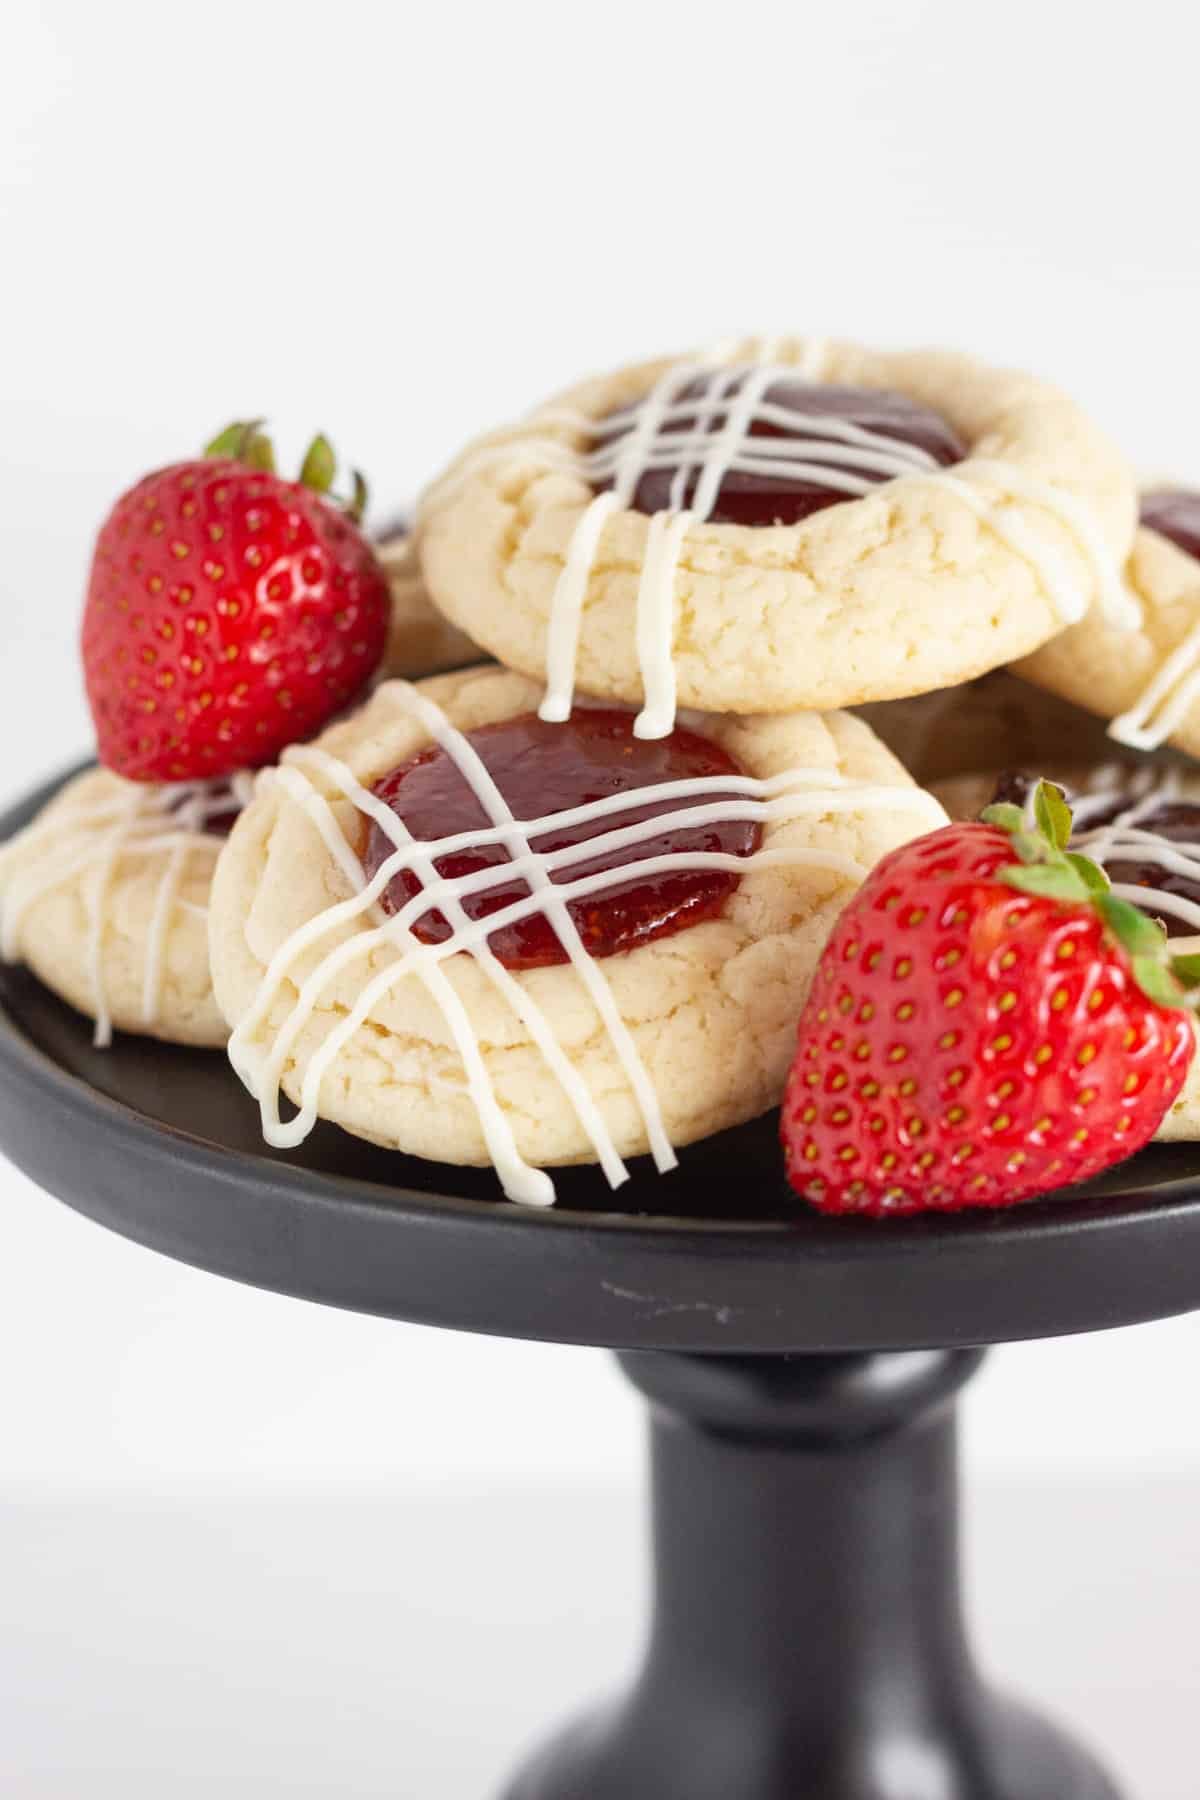 Strawberry Jam Cookies on a black cake plate with a couple fresh strawberries.